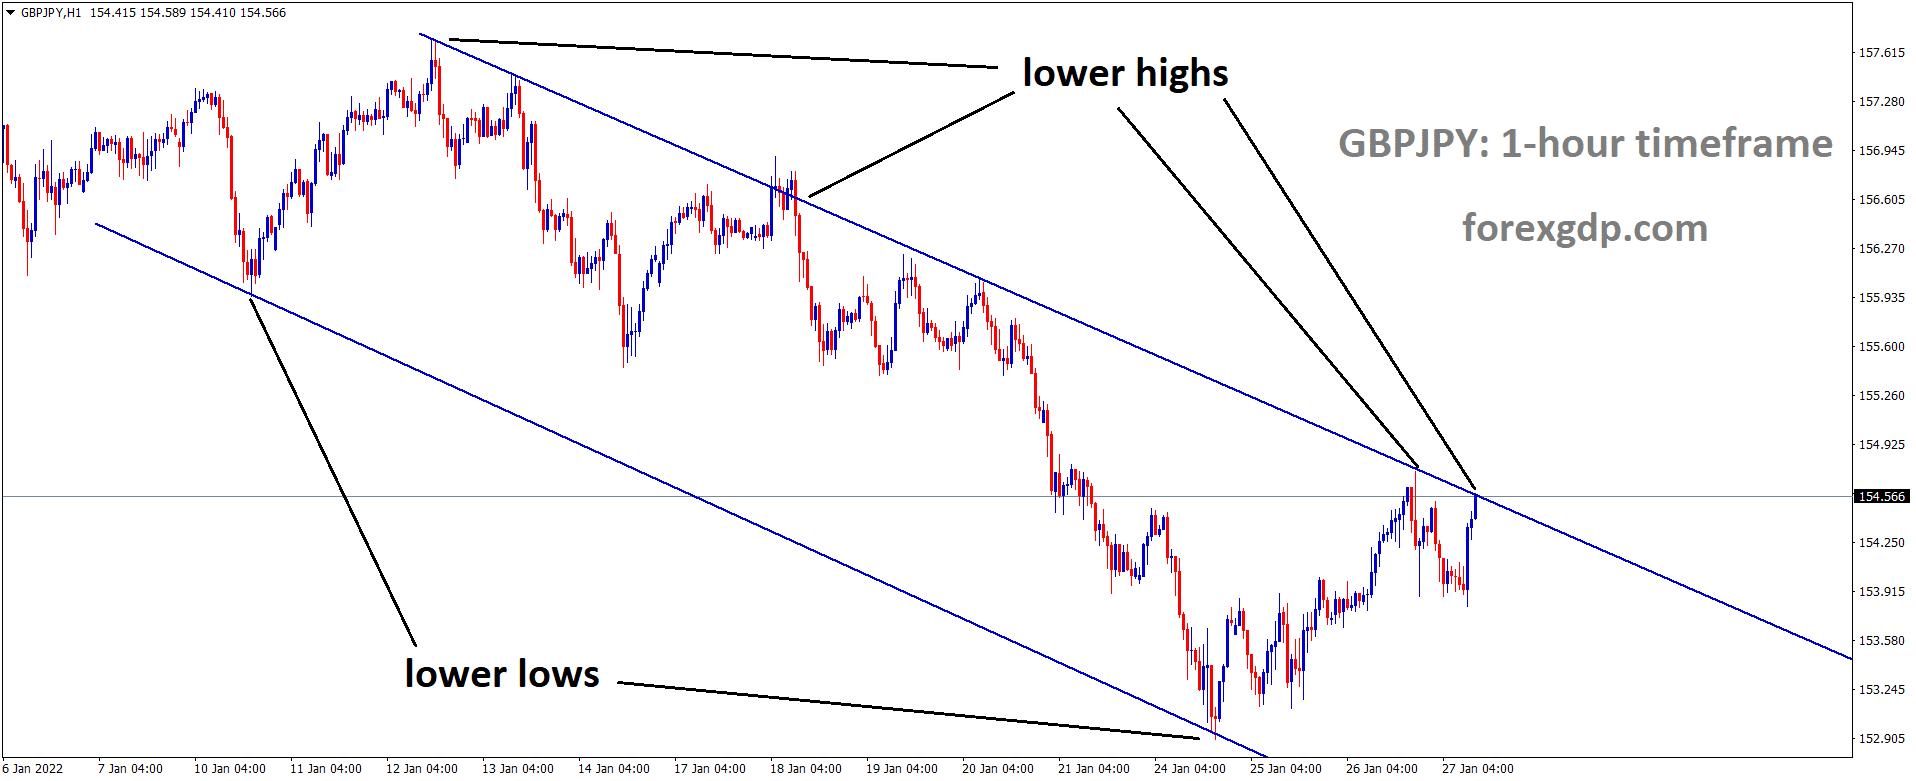 GBPJPY is moving in the Descending channel and the market has reached the lower high area of the channel.